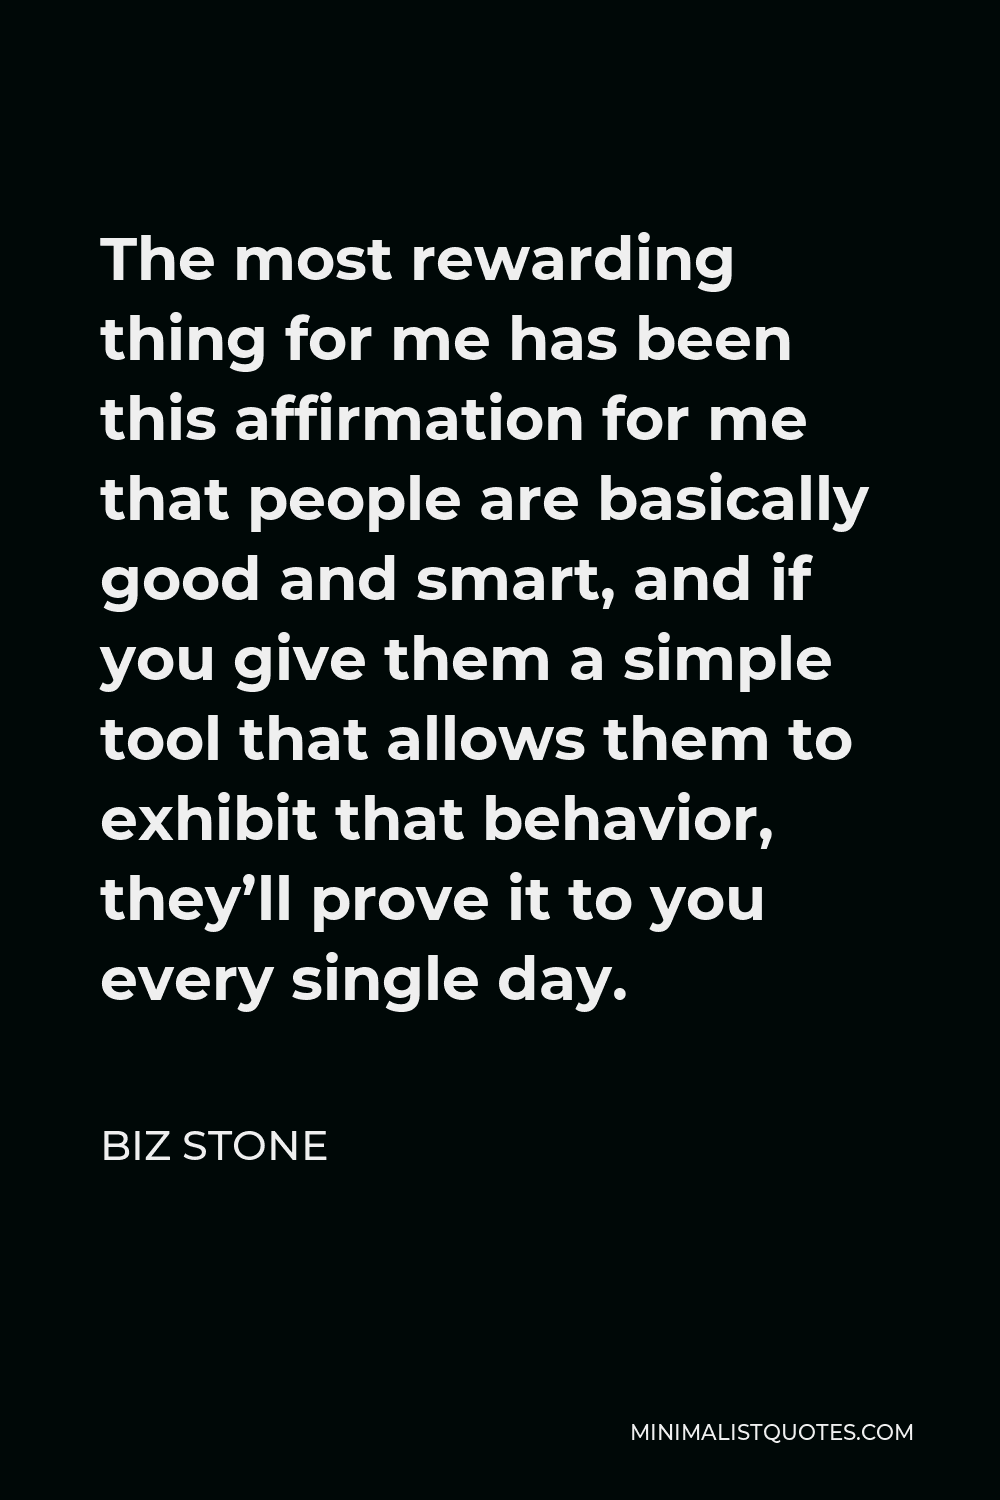 Biz Stone Quote - The most rewarding thing for me has been this affirmation for me that people are basically good and smart, and if you give them a simple tool that allows them to exhibit that behavior, they’ll prove it to you every single day.